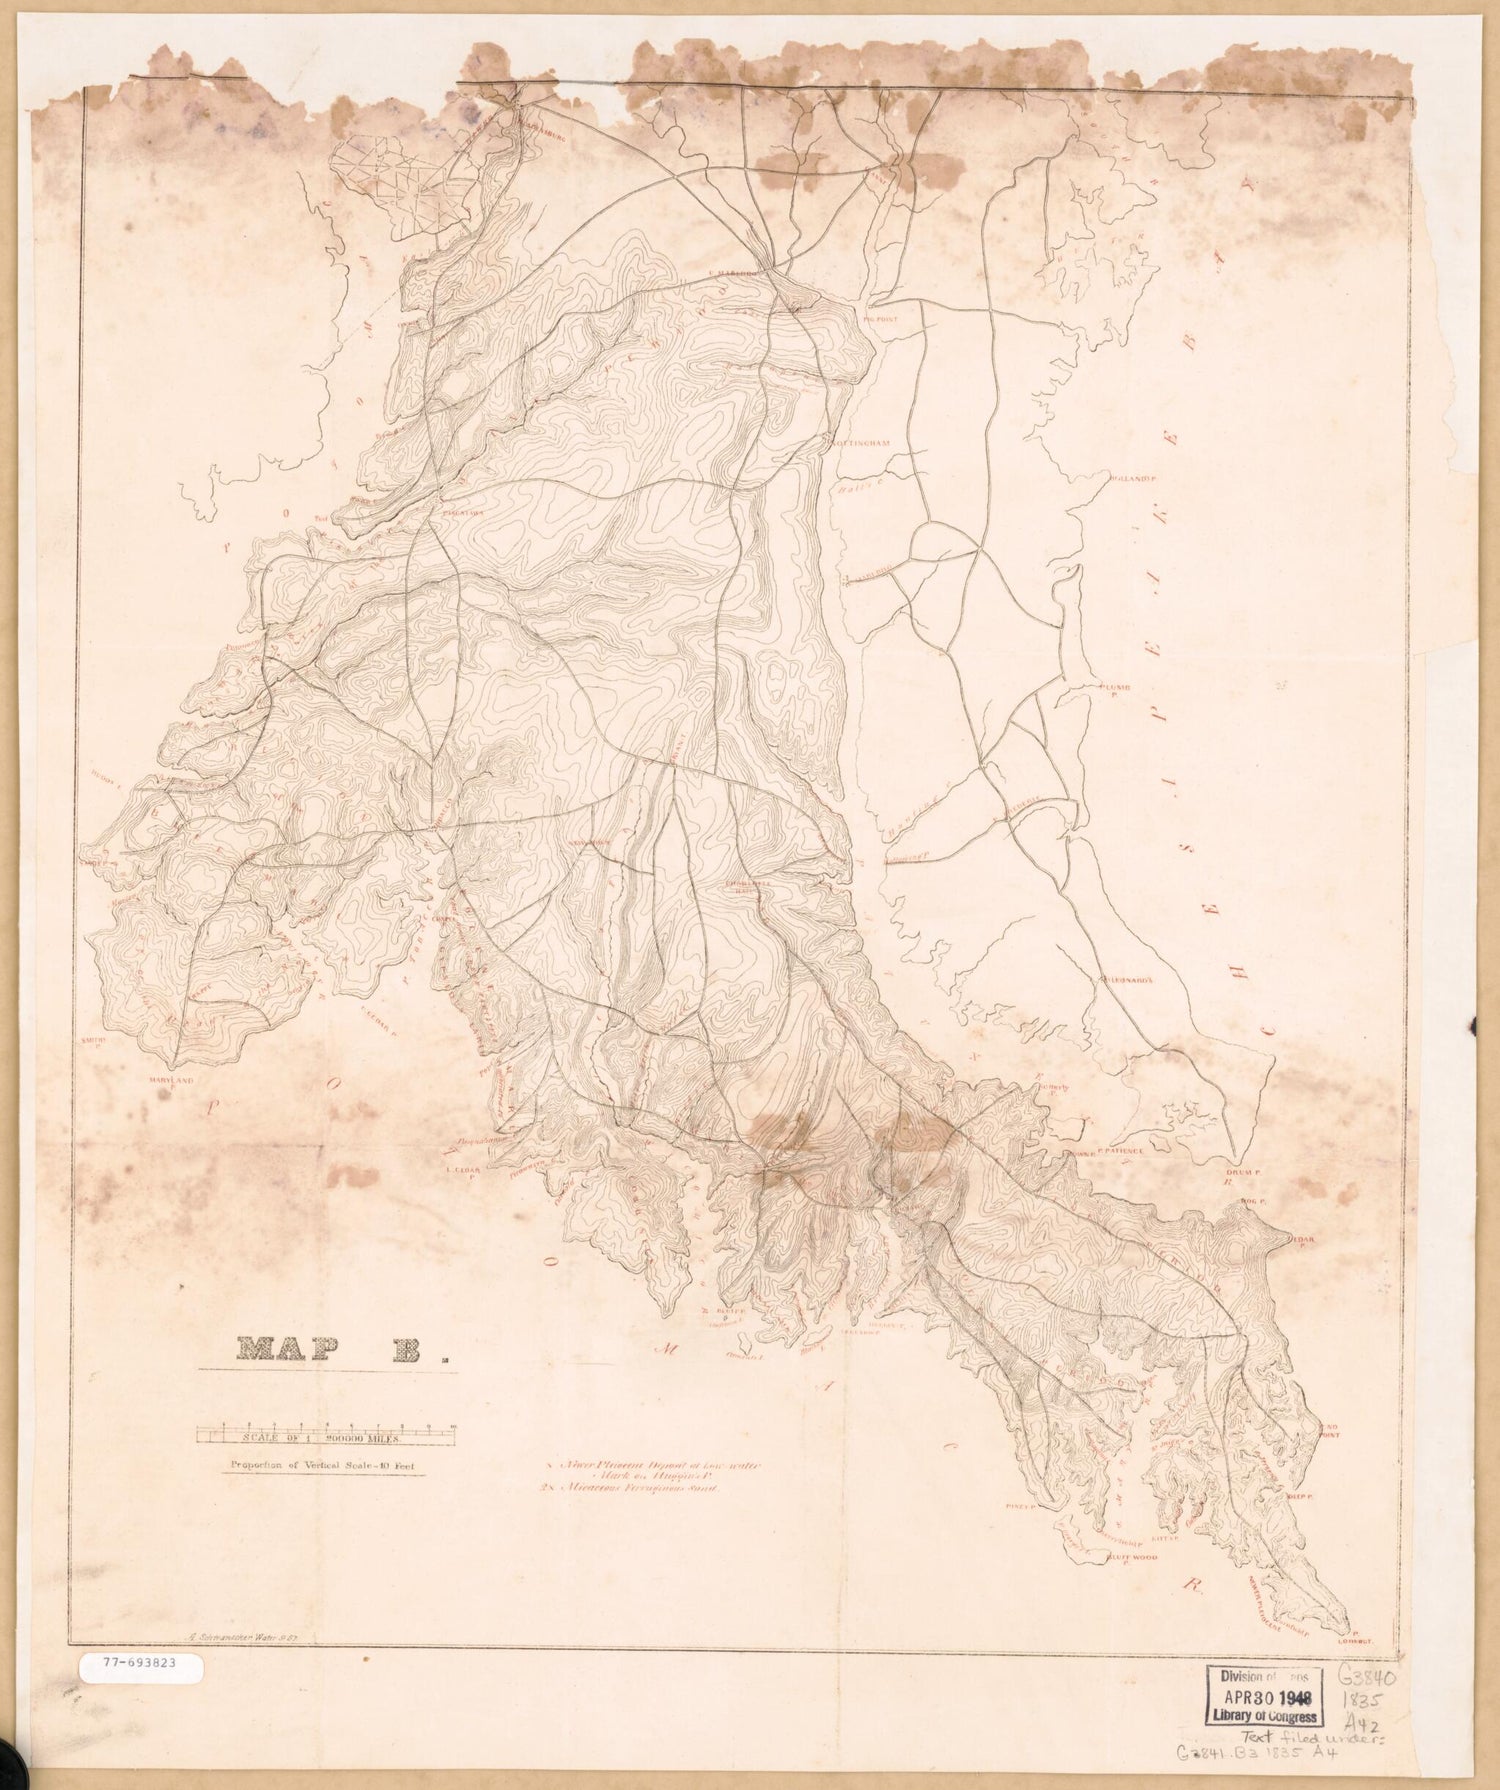 This old map of Map B from 1835 was created by John H. (John Henry)] [Alexander, A. Schwanecker in 1835